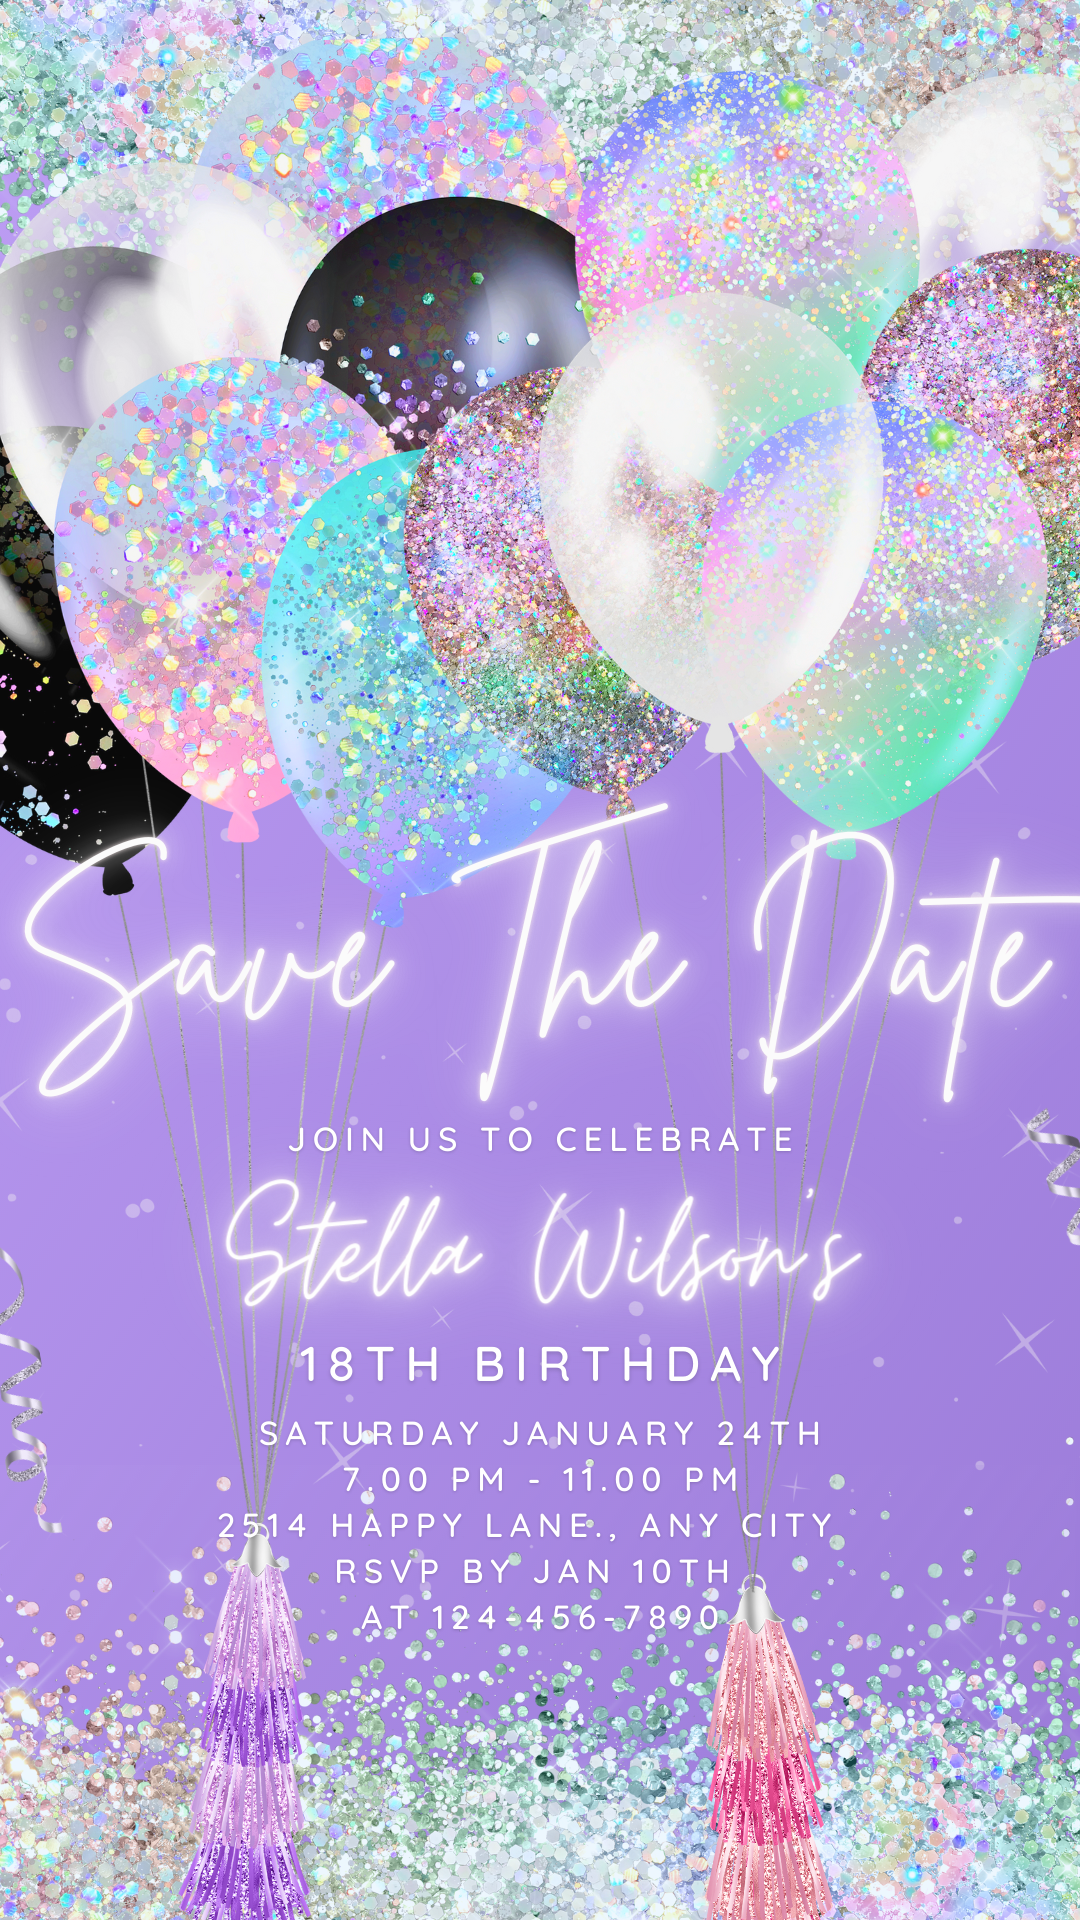 Save the Date Balloon Invite for any Party Events, Celebrate Baby Shower, Birthday, for Girls with Editable Video Invitation Template